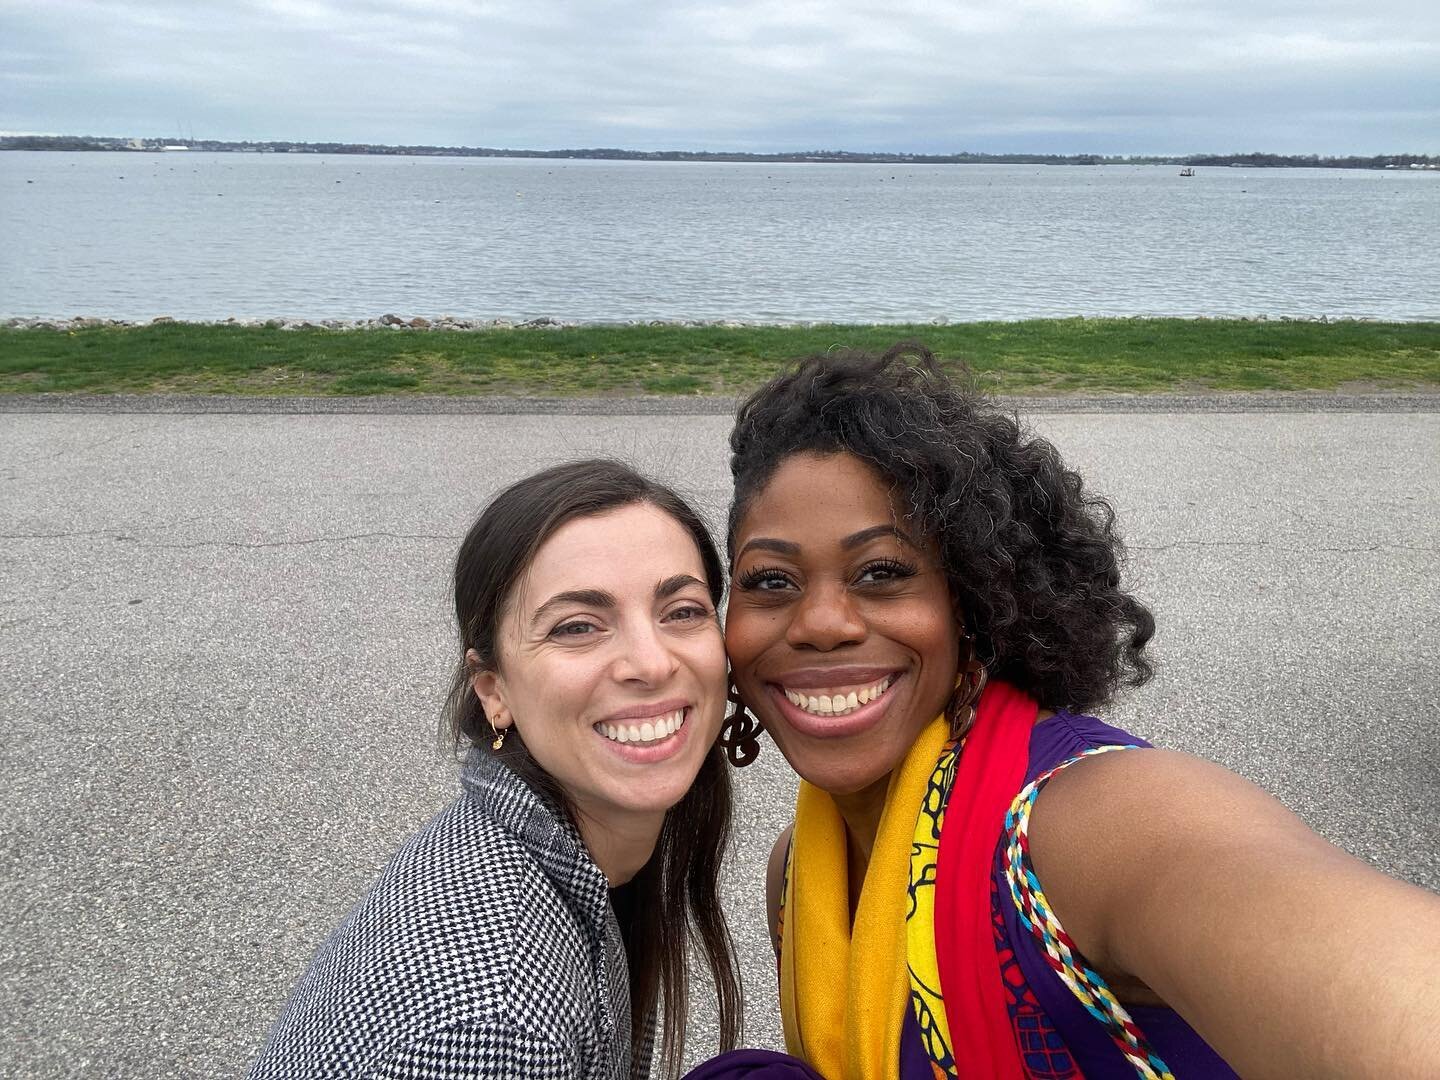 A joyful, whirlwind weekend ✨ I got to collaborate again with my wildly talented partner in crime @chrystalewilliams in beautiful Jamestown, RI. Tired but so happy. 💜 

#jamestown #rhodeisland #classicalmusic #voice #piano #recital #collaboration #a